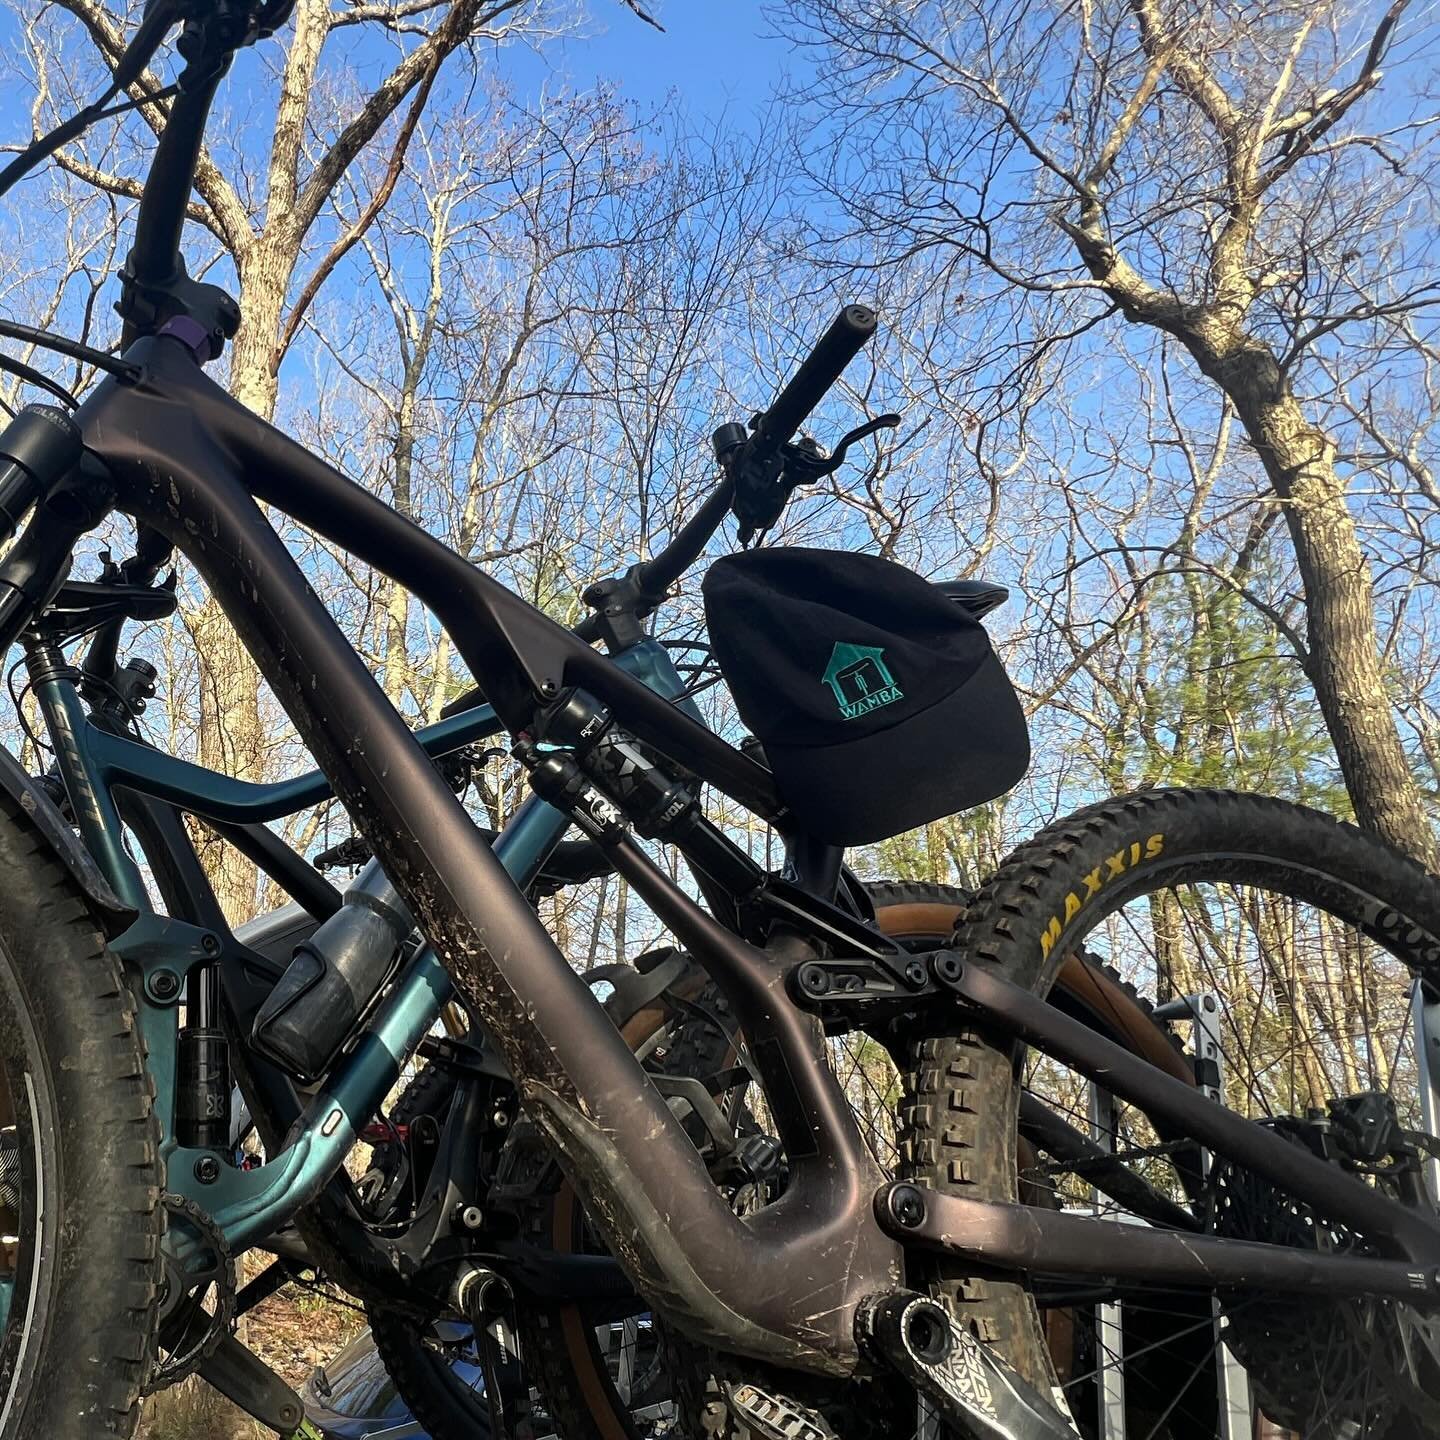 While we wait for riding season, let&rsquo;s play #WheresWAMBA. Share some pics of your WAMBA hats and stickers wherever you take them! April break in Woodstock saw some of us driving south for trails, while others are hitting the beaches or slopes.